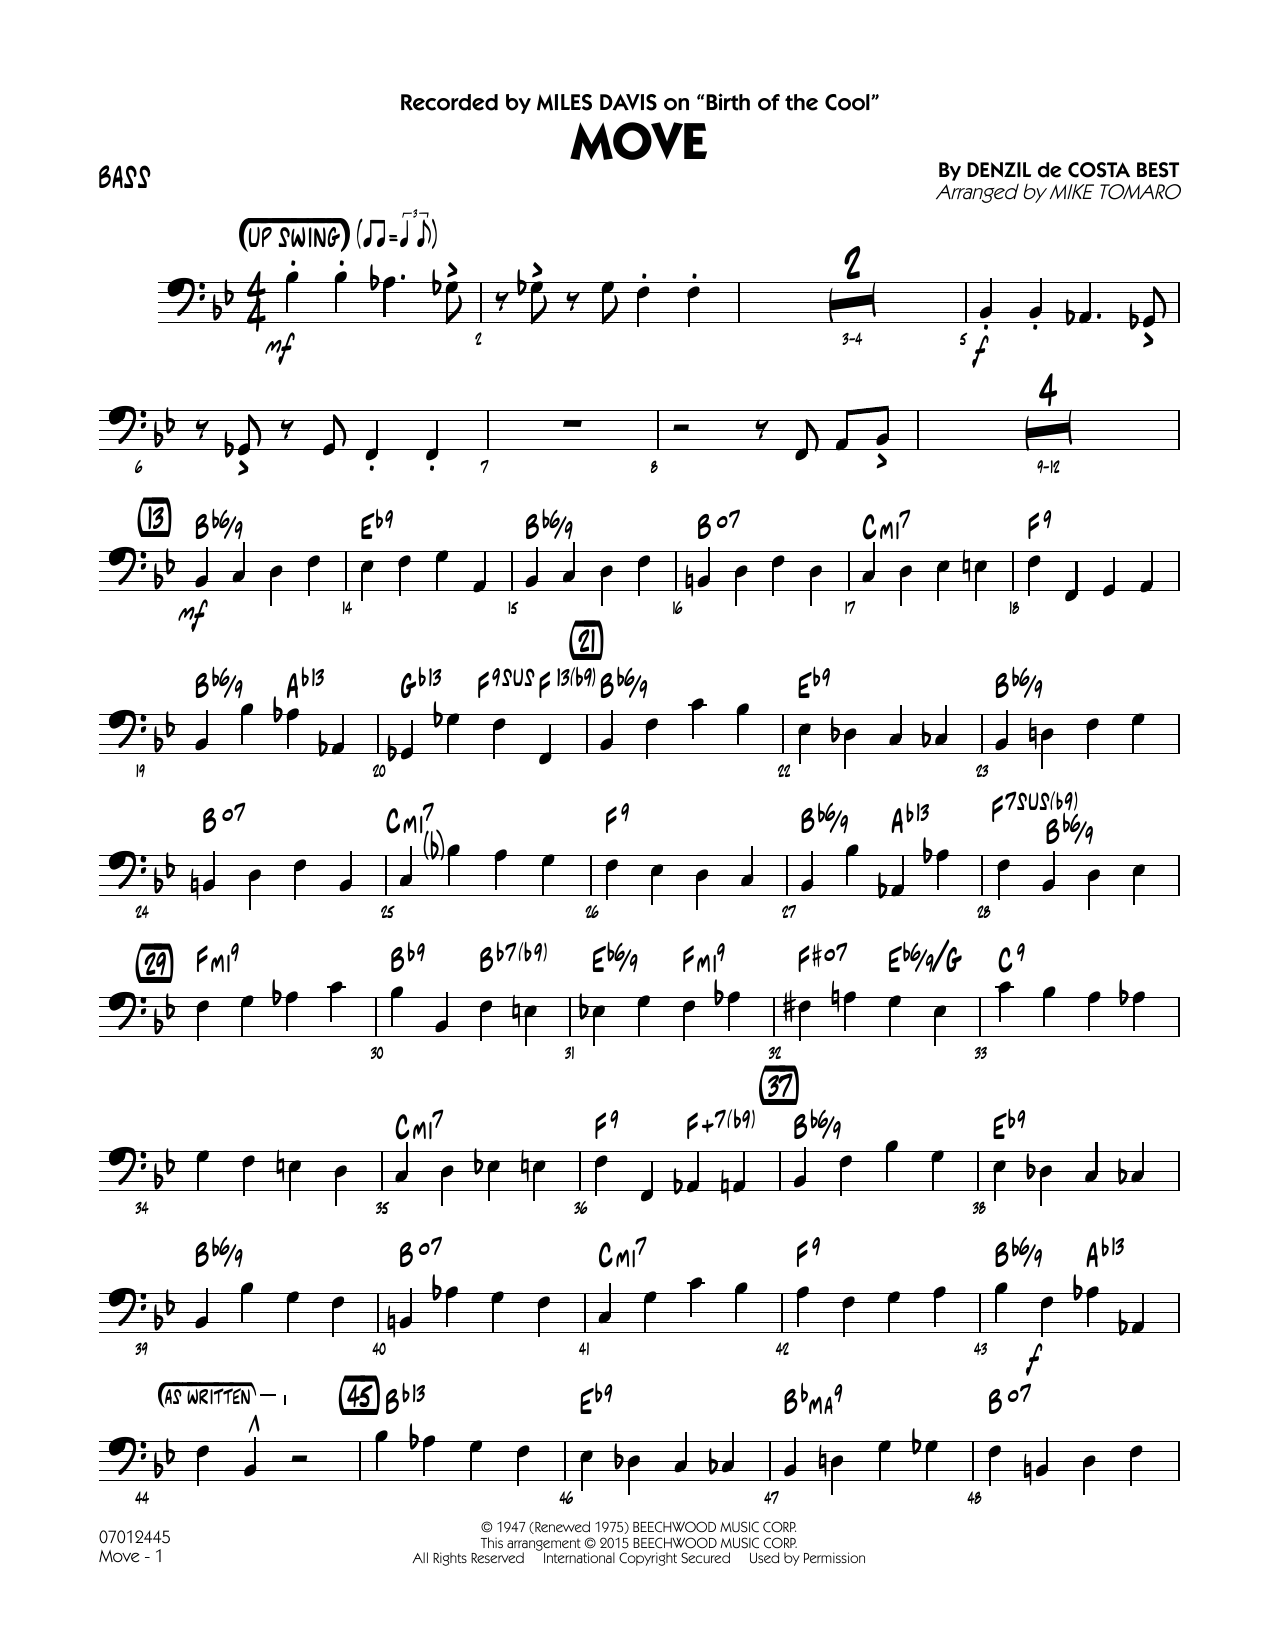 Mike Tomaro Move - Bass sheet music notes and chords. Download Printable PDF.